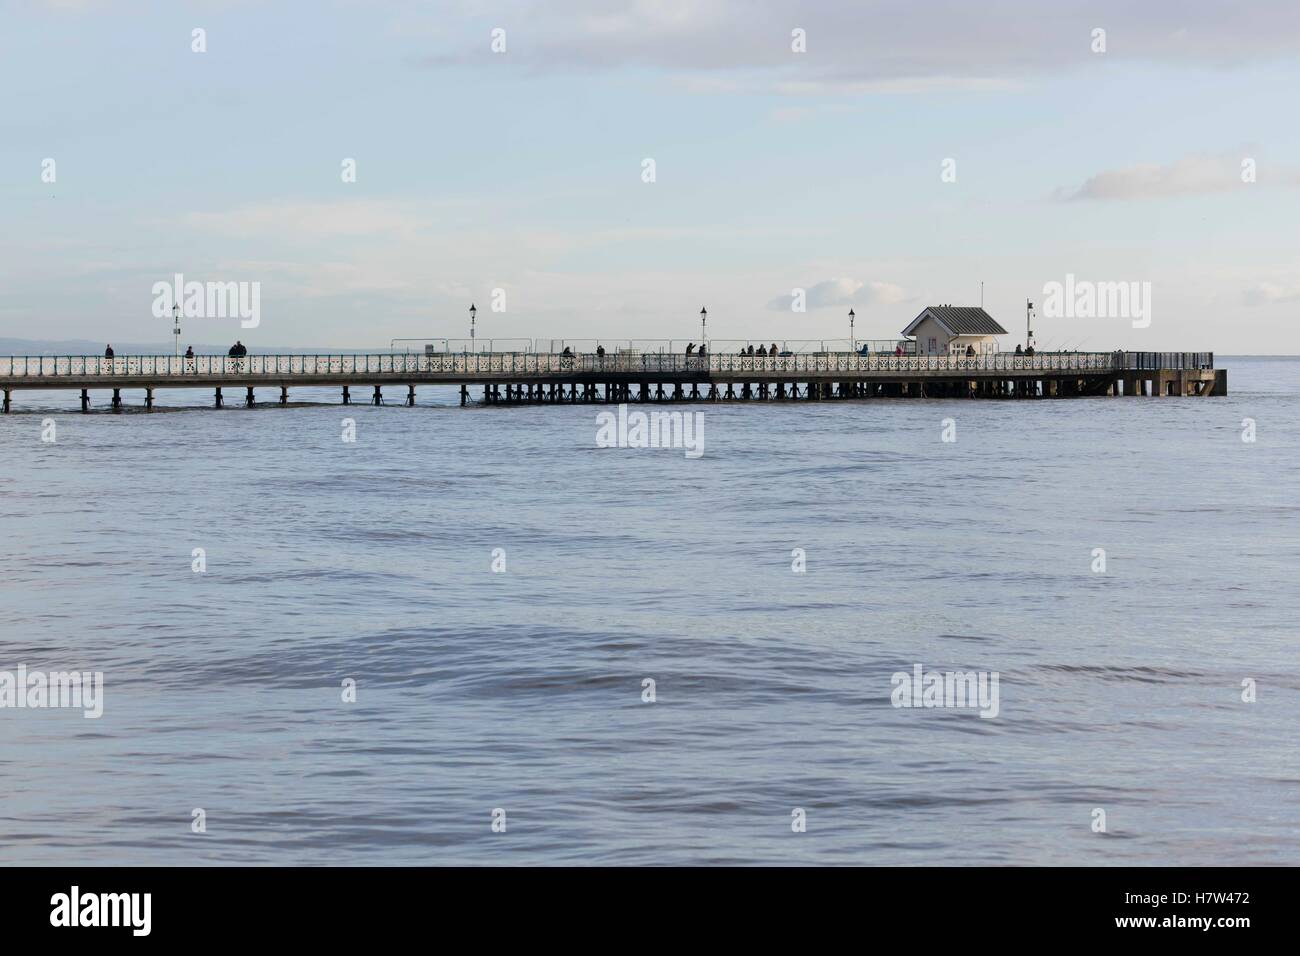 High tide at Penarth Pier in Penarth, South Wales. Stock Photo